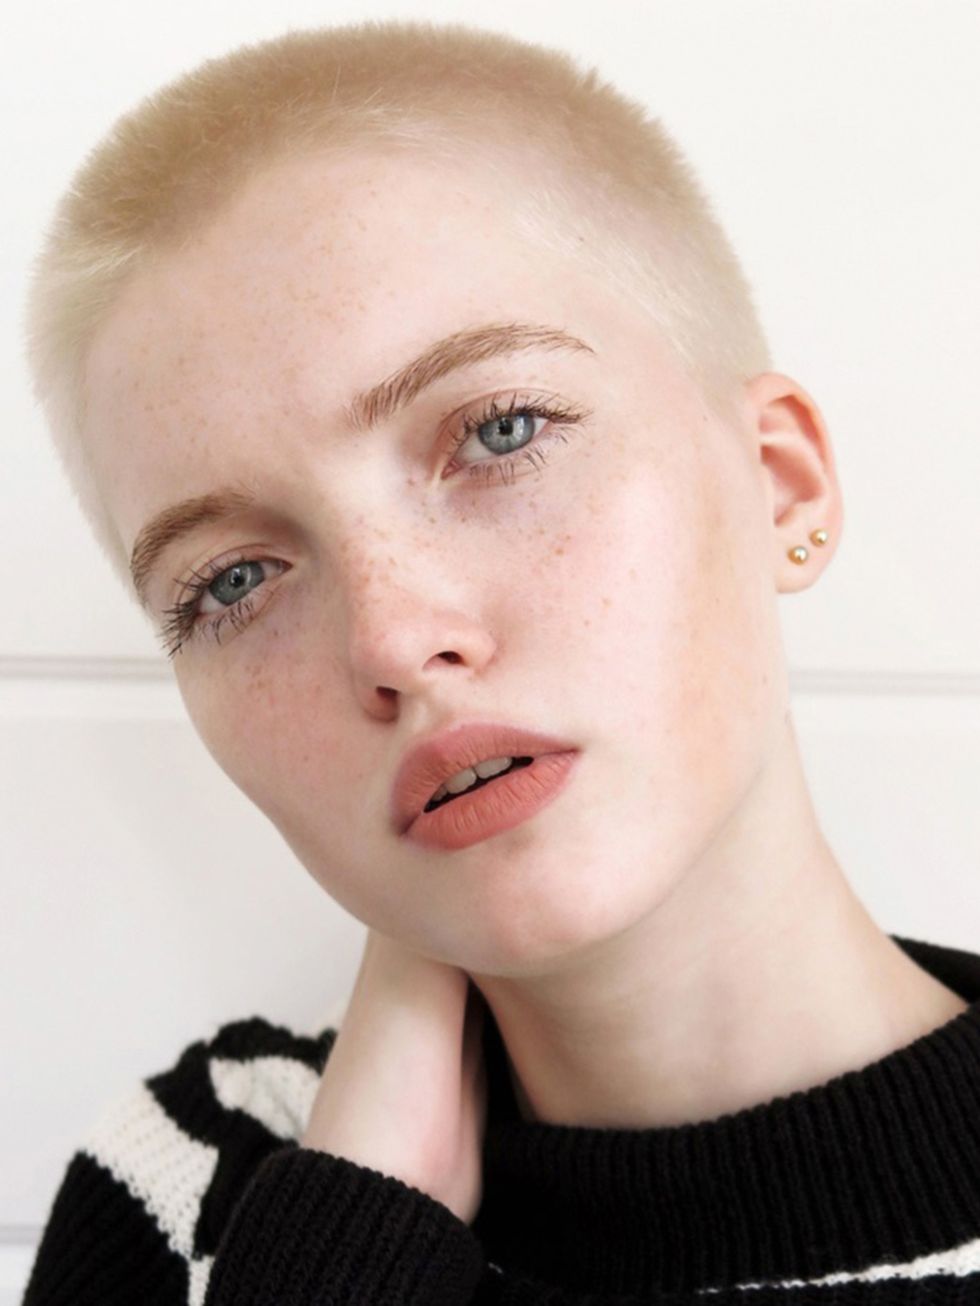 <p><strong>Ruth Bell</strong></p>

<p>Trademark: Buzz cut hair</p>

<p>SS16 Shows walked: 15</p>

<p>Highlights: Saint Laurent, Gucci, Lanvin, Versace</p>

<p>Follow her: @ruthnotmay</p>

<p>Why we love her: Ruth has had an amazing catwalk season and chan